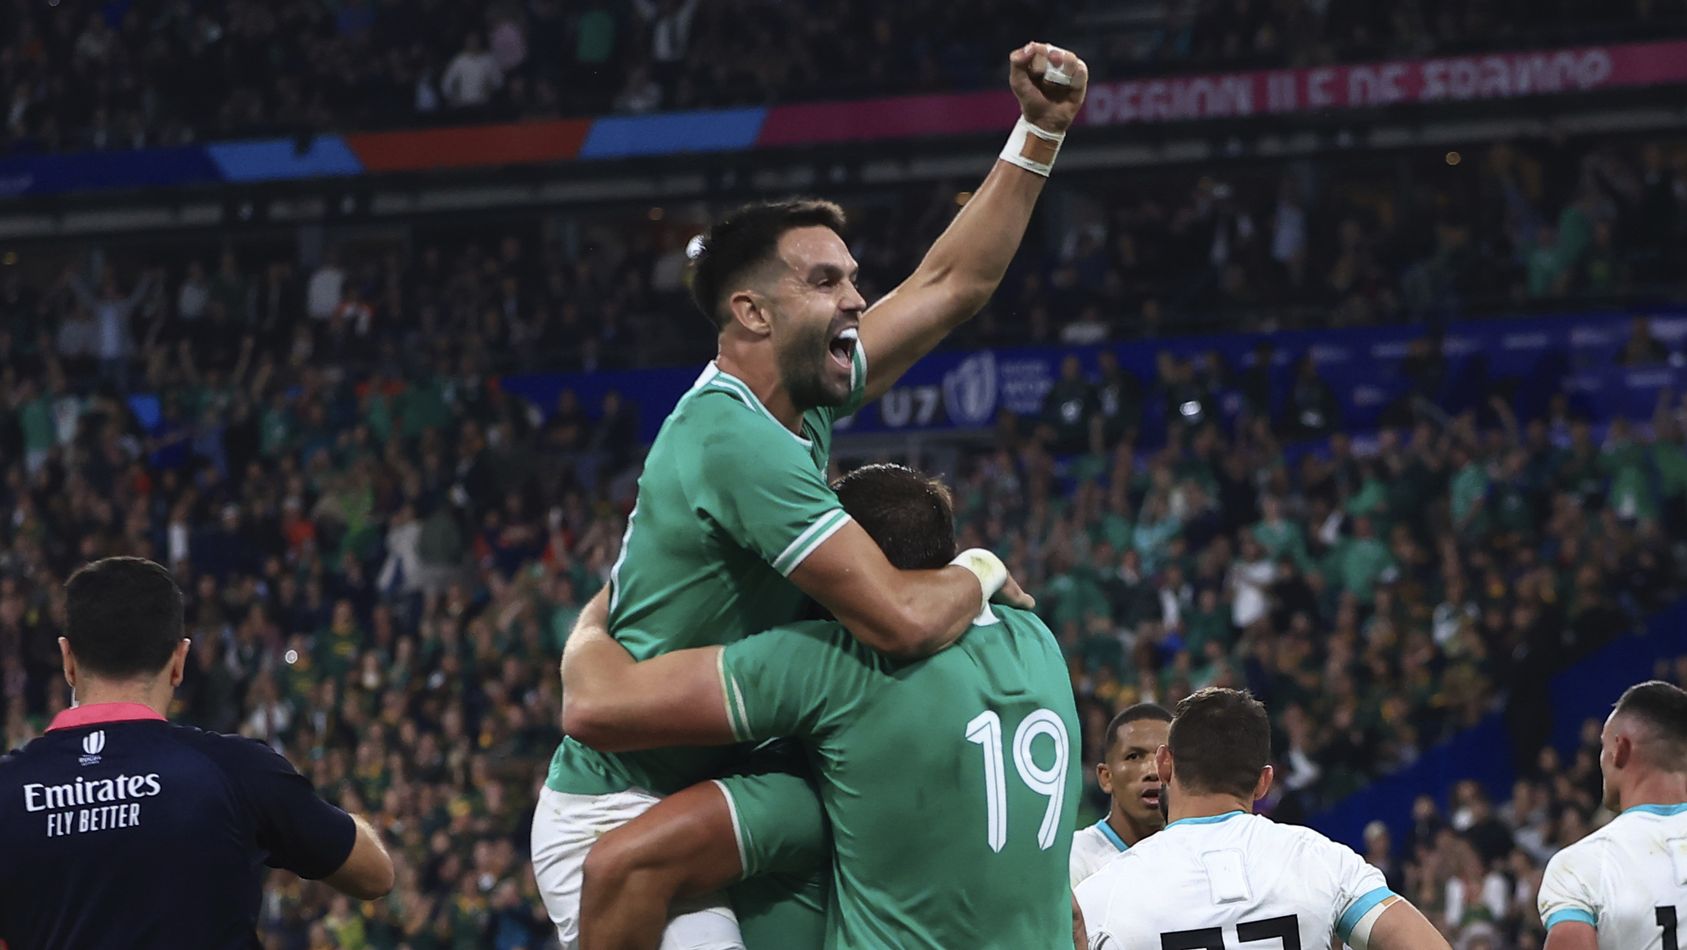 Ireland celebrate as they defeat South Africa during the Rugby World Cup at Stade de France.